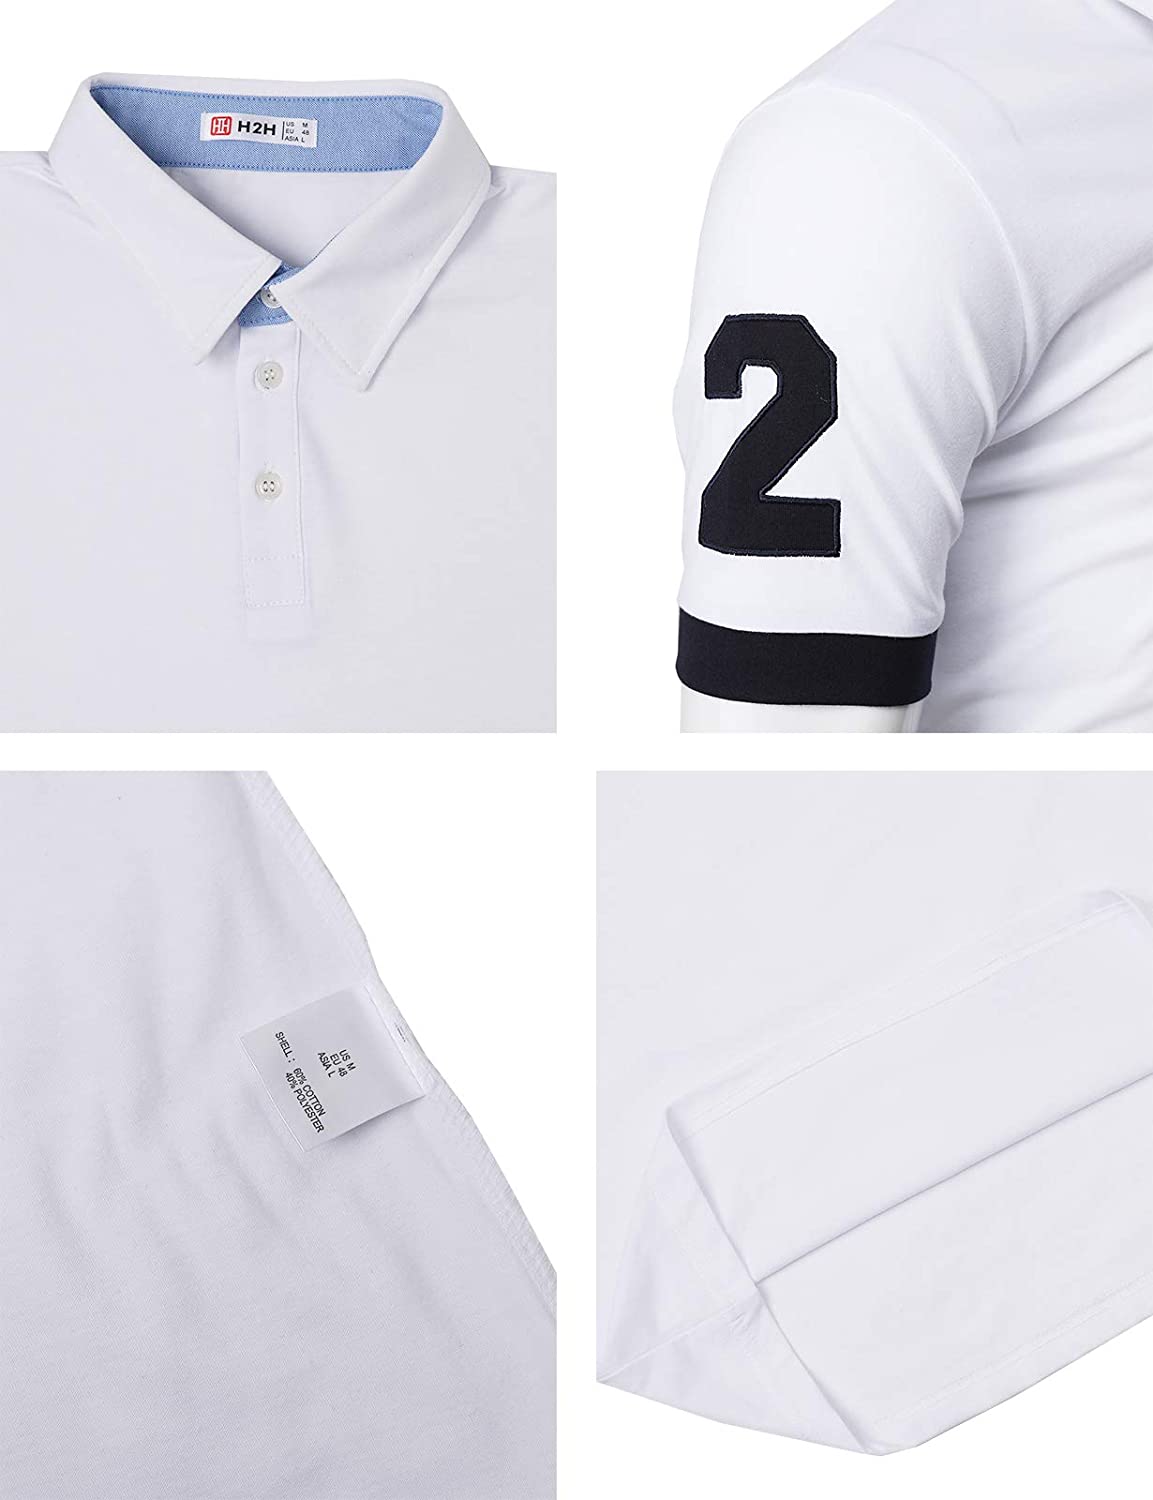 Mens Casual Fit Polo T-Shirts